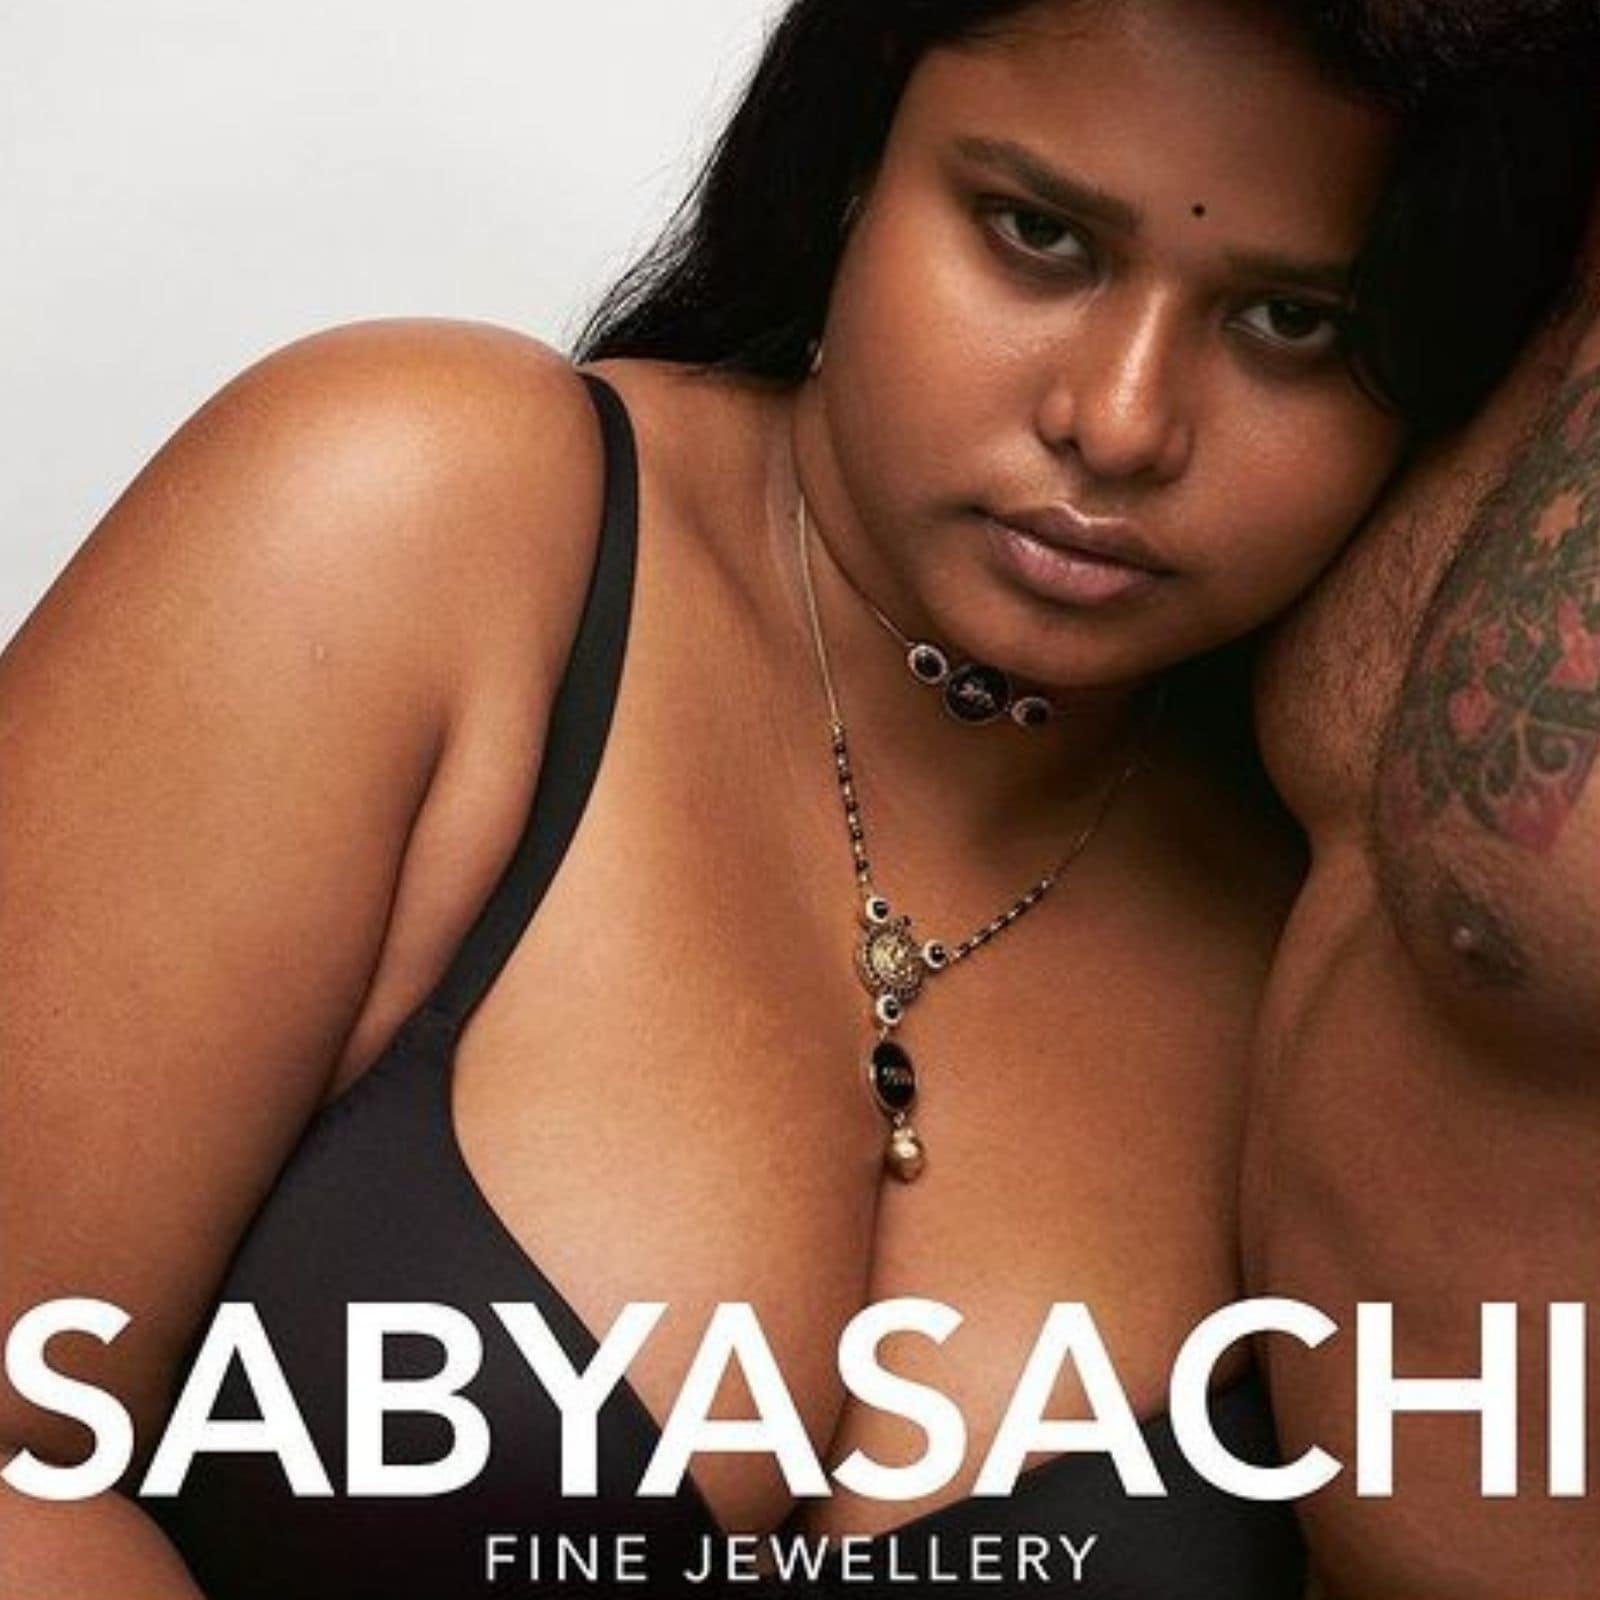 Bp Dipika - Sabyasachi's New Campaign Faces Flak For Featuring Mangalsutra as 'Fashion  Jewellery' - News18